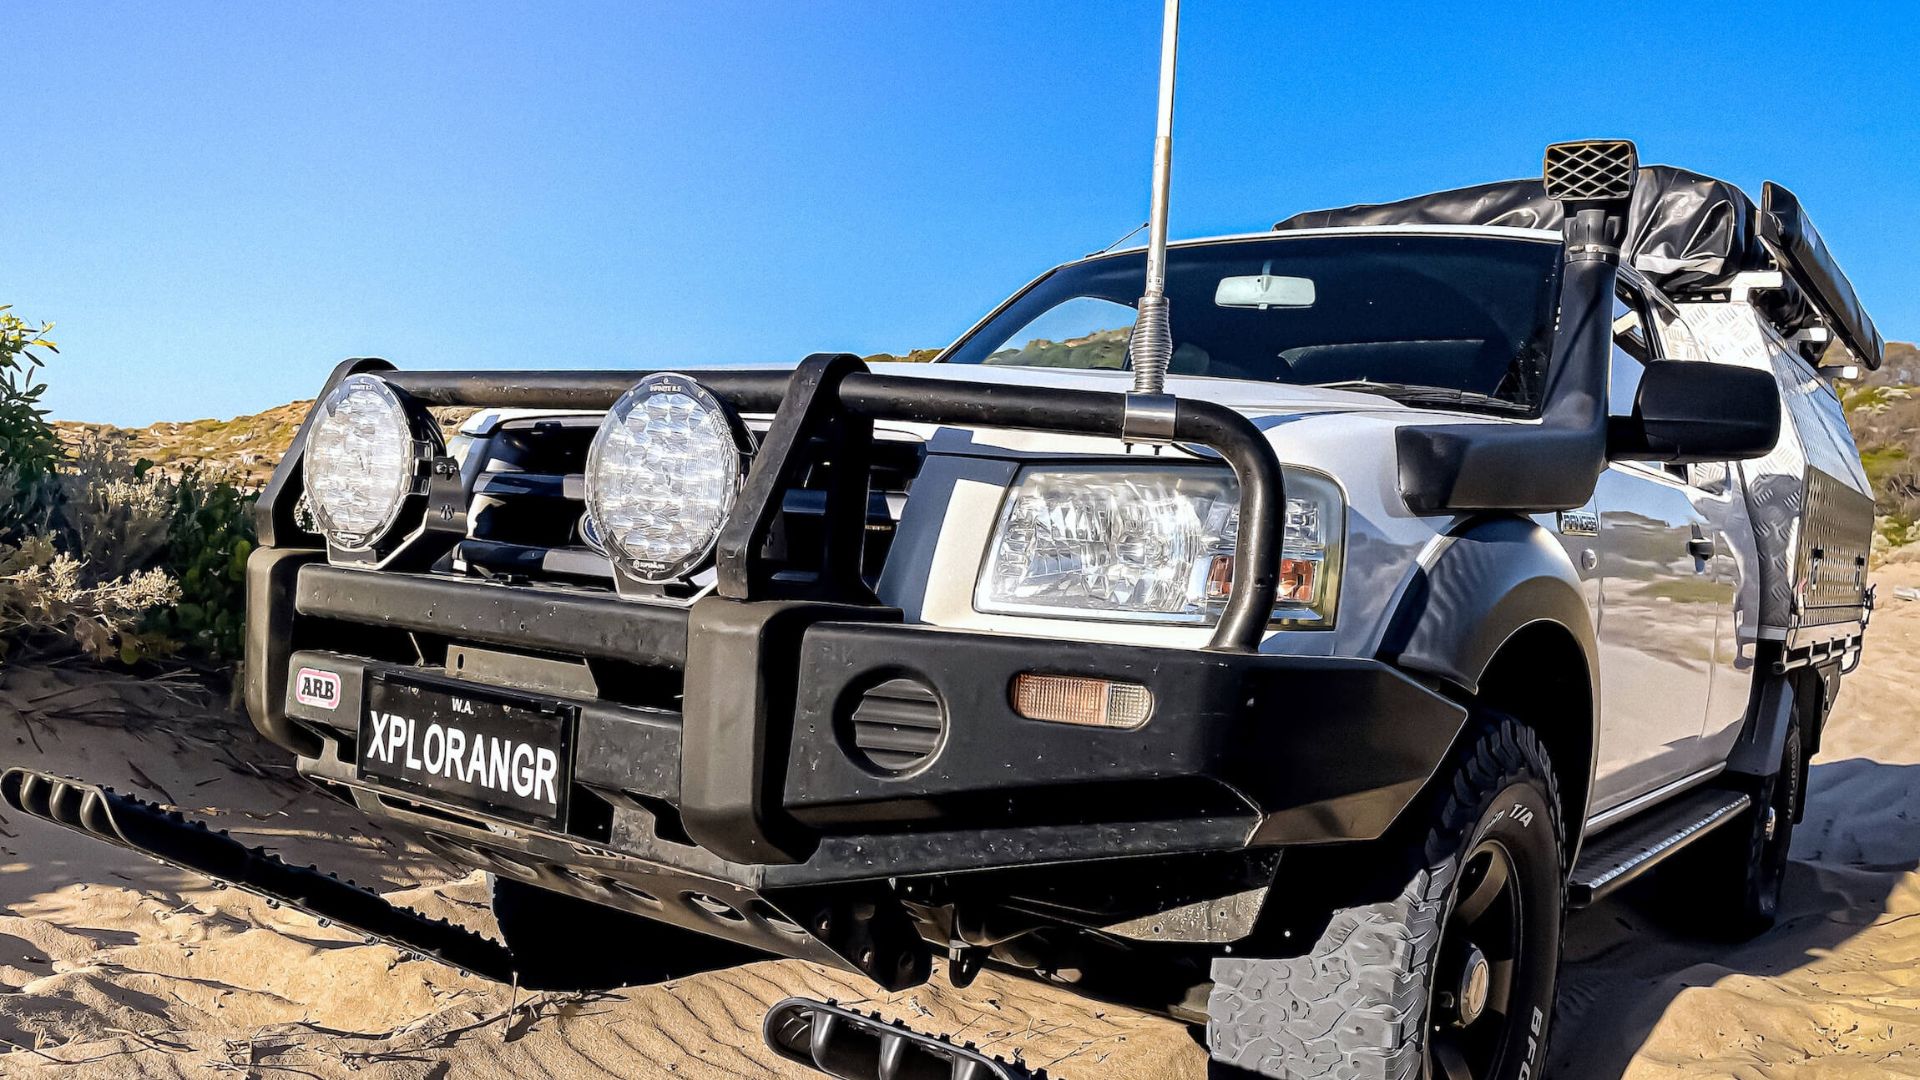 The Best 4WD Tracks In Australia By State